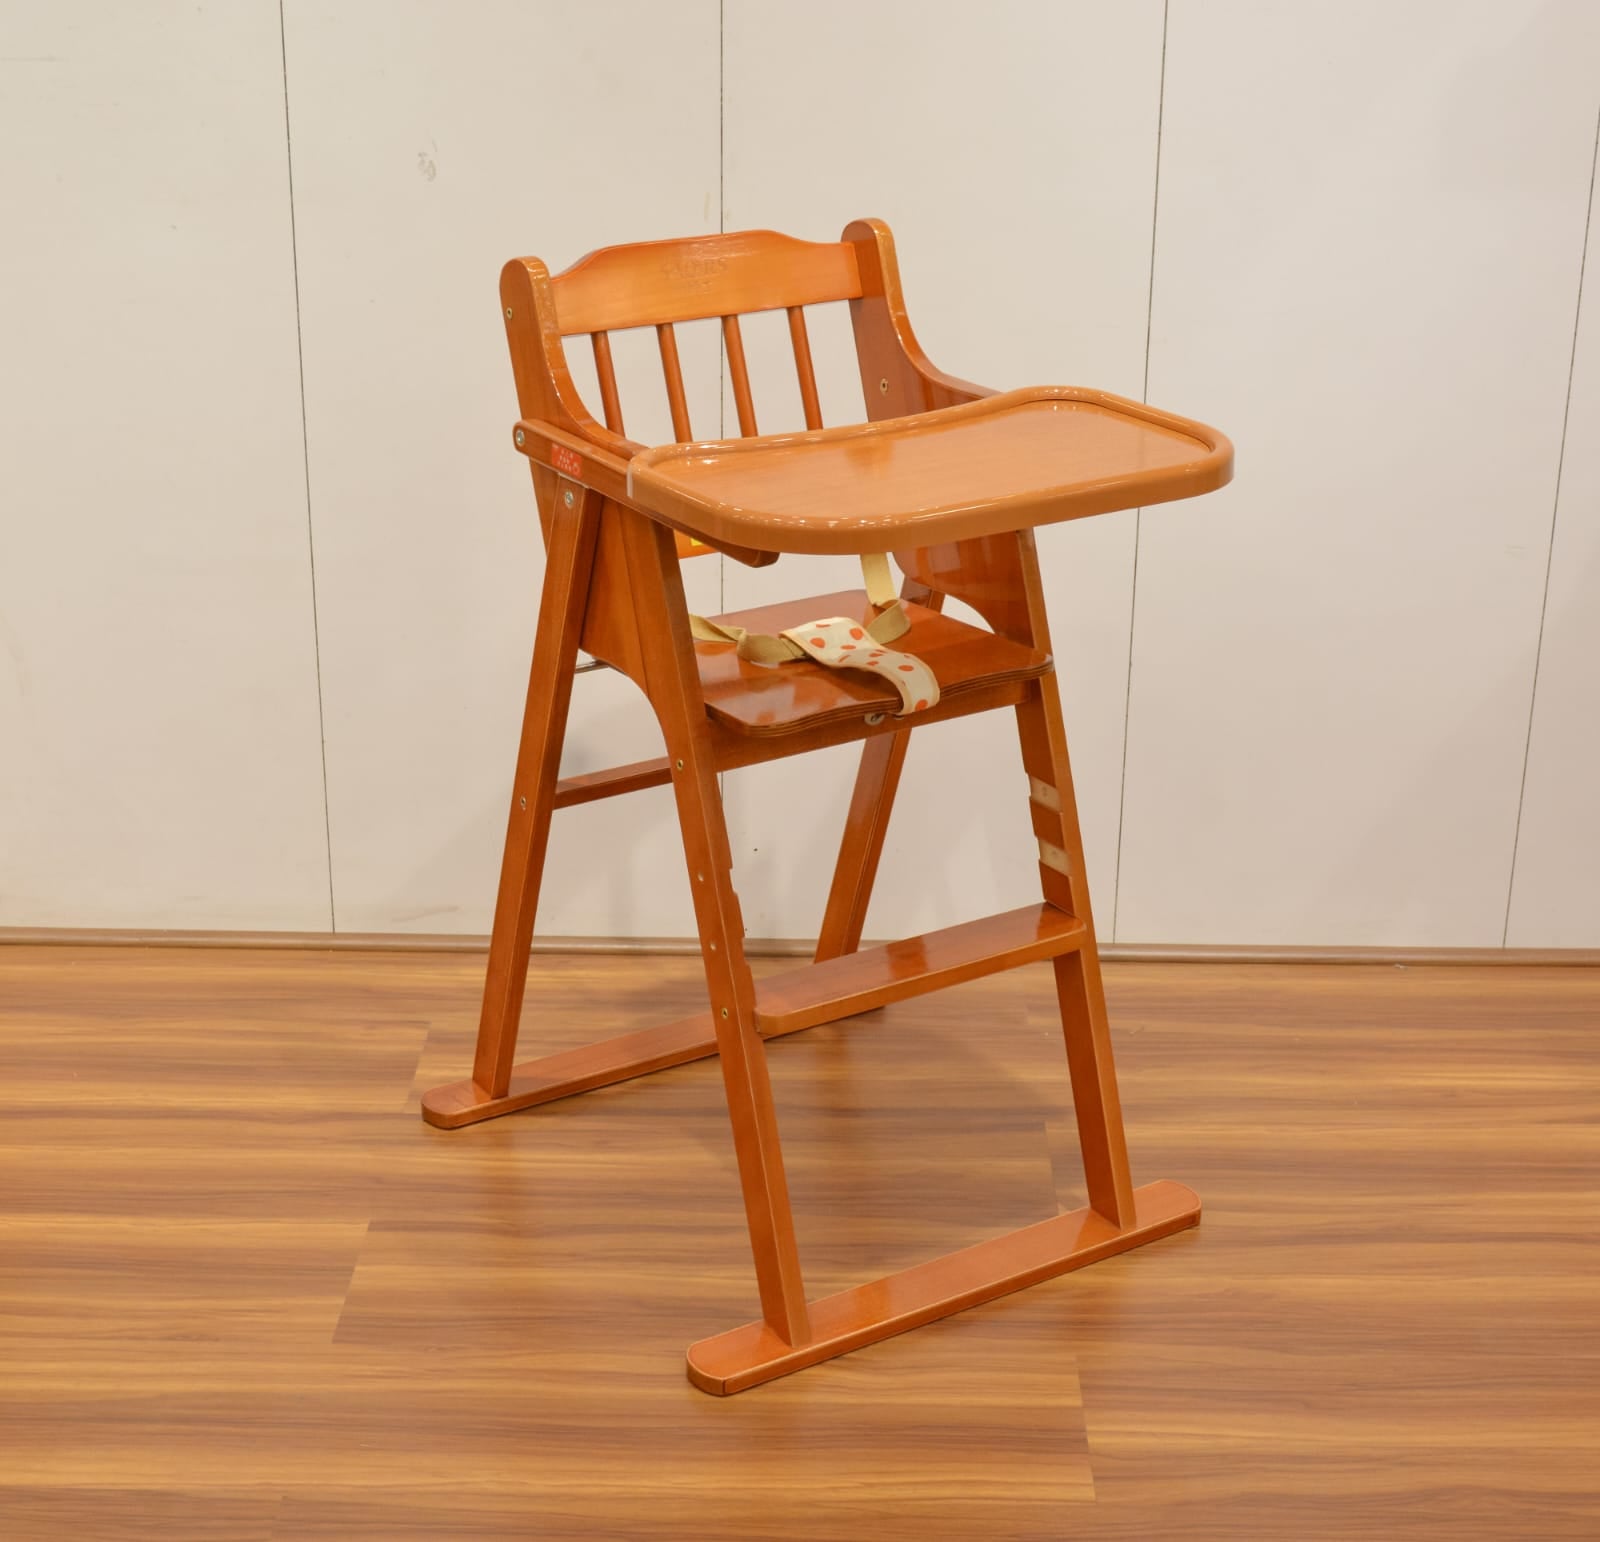 Wooden Foldable Baby Dinning High Chair